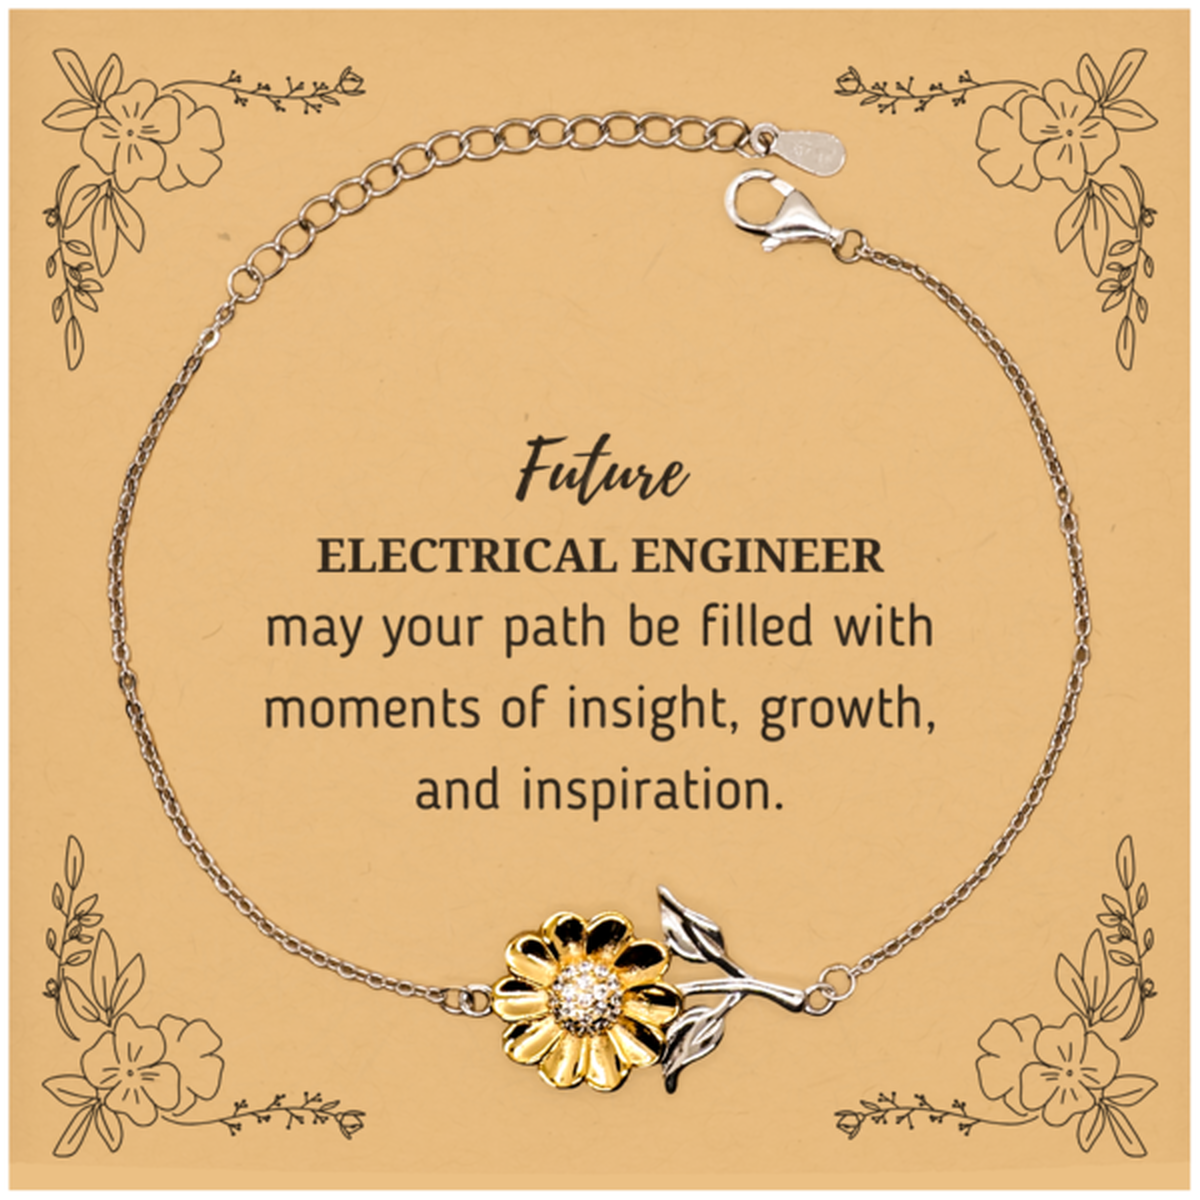 Future Electrical Engineer Gifts, May your path be filled with moments of insight, Graduation Gifts for New Electrical Engineer, Christmas Unique Sunflower Bracelet For Men, Women, Friends